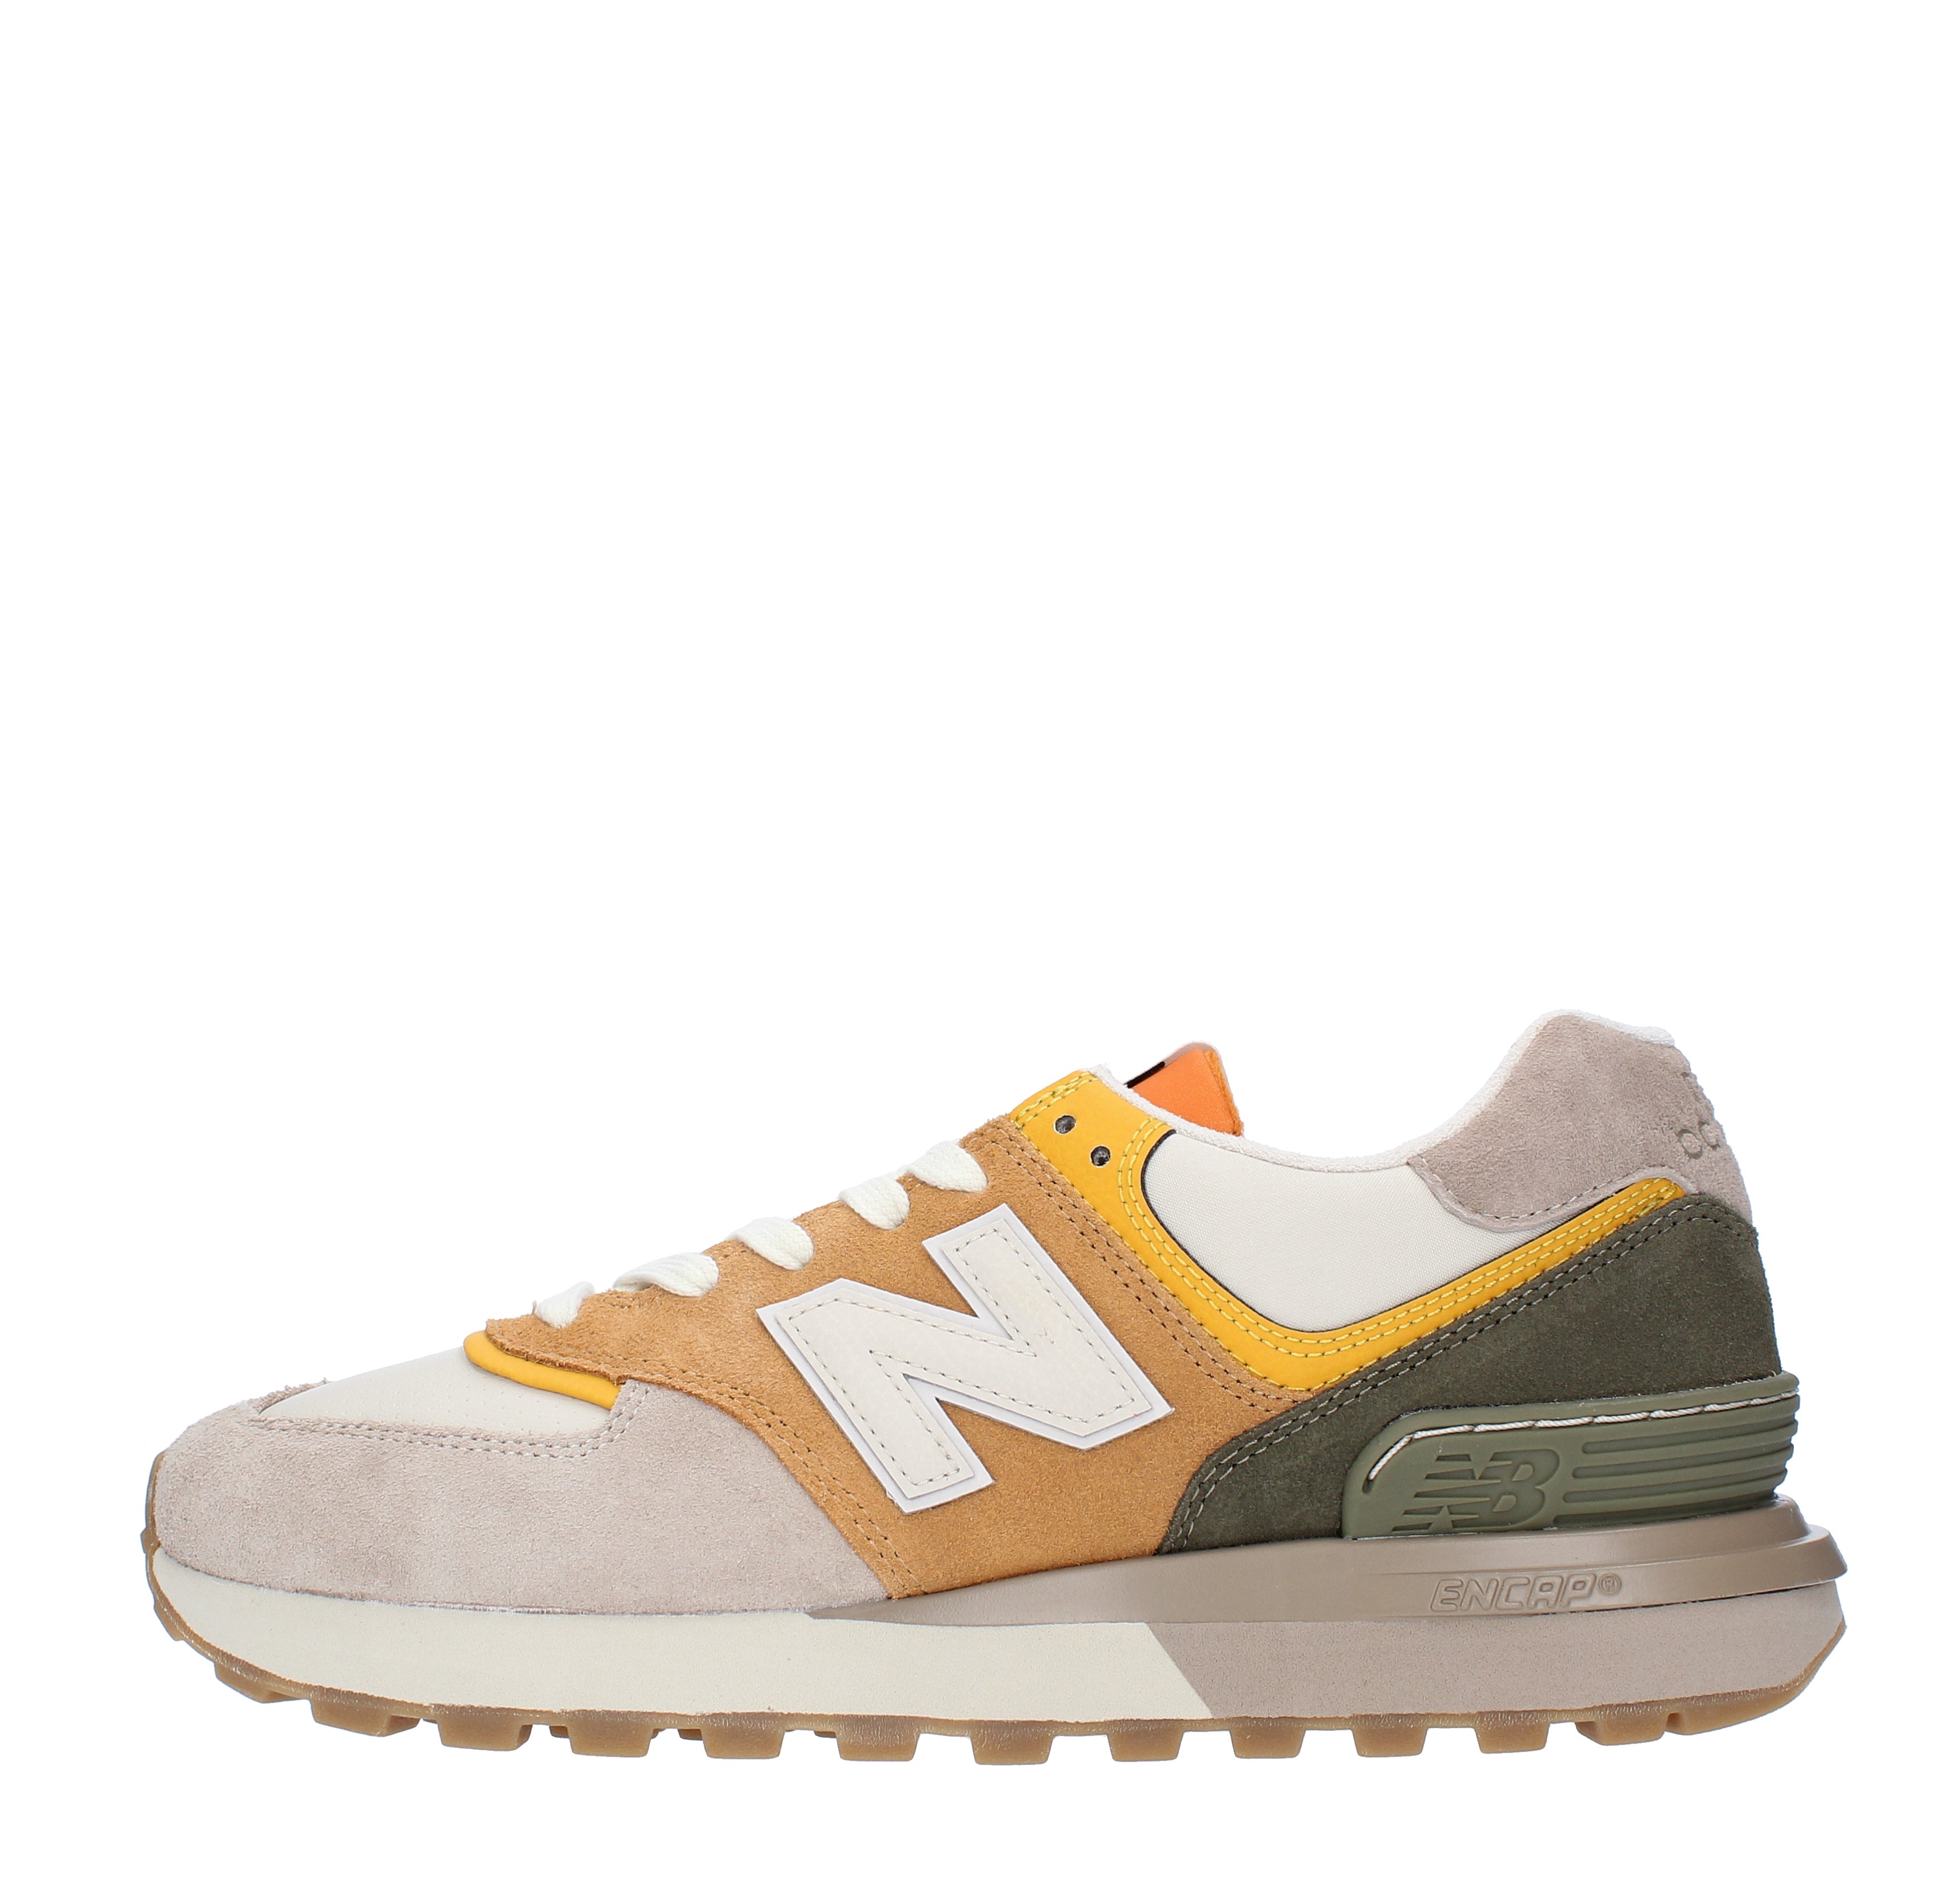 New Balance 574 trainers in leather, suede and mesh - NEW BALANCE - Ginevra  calzature